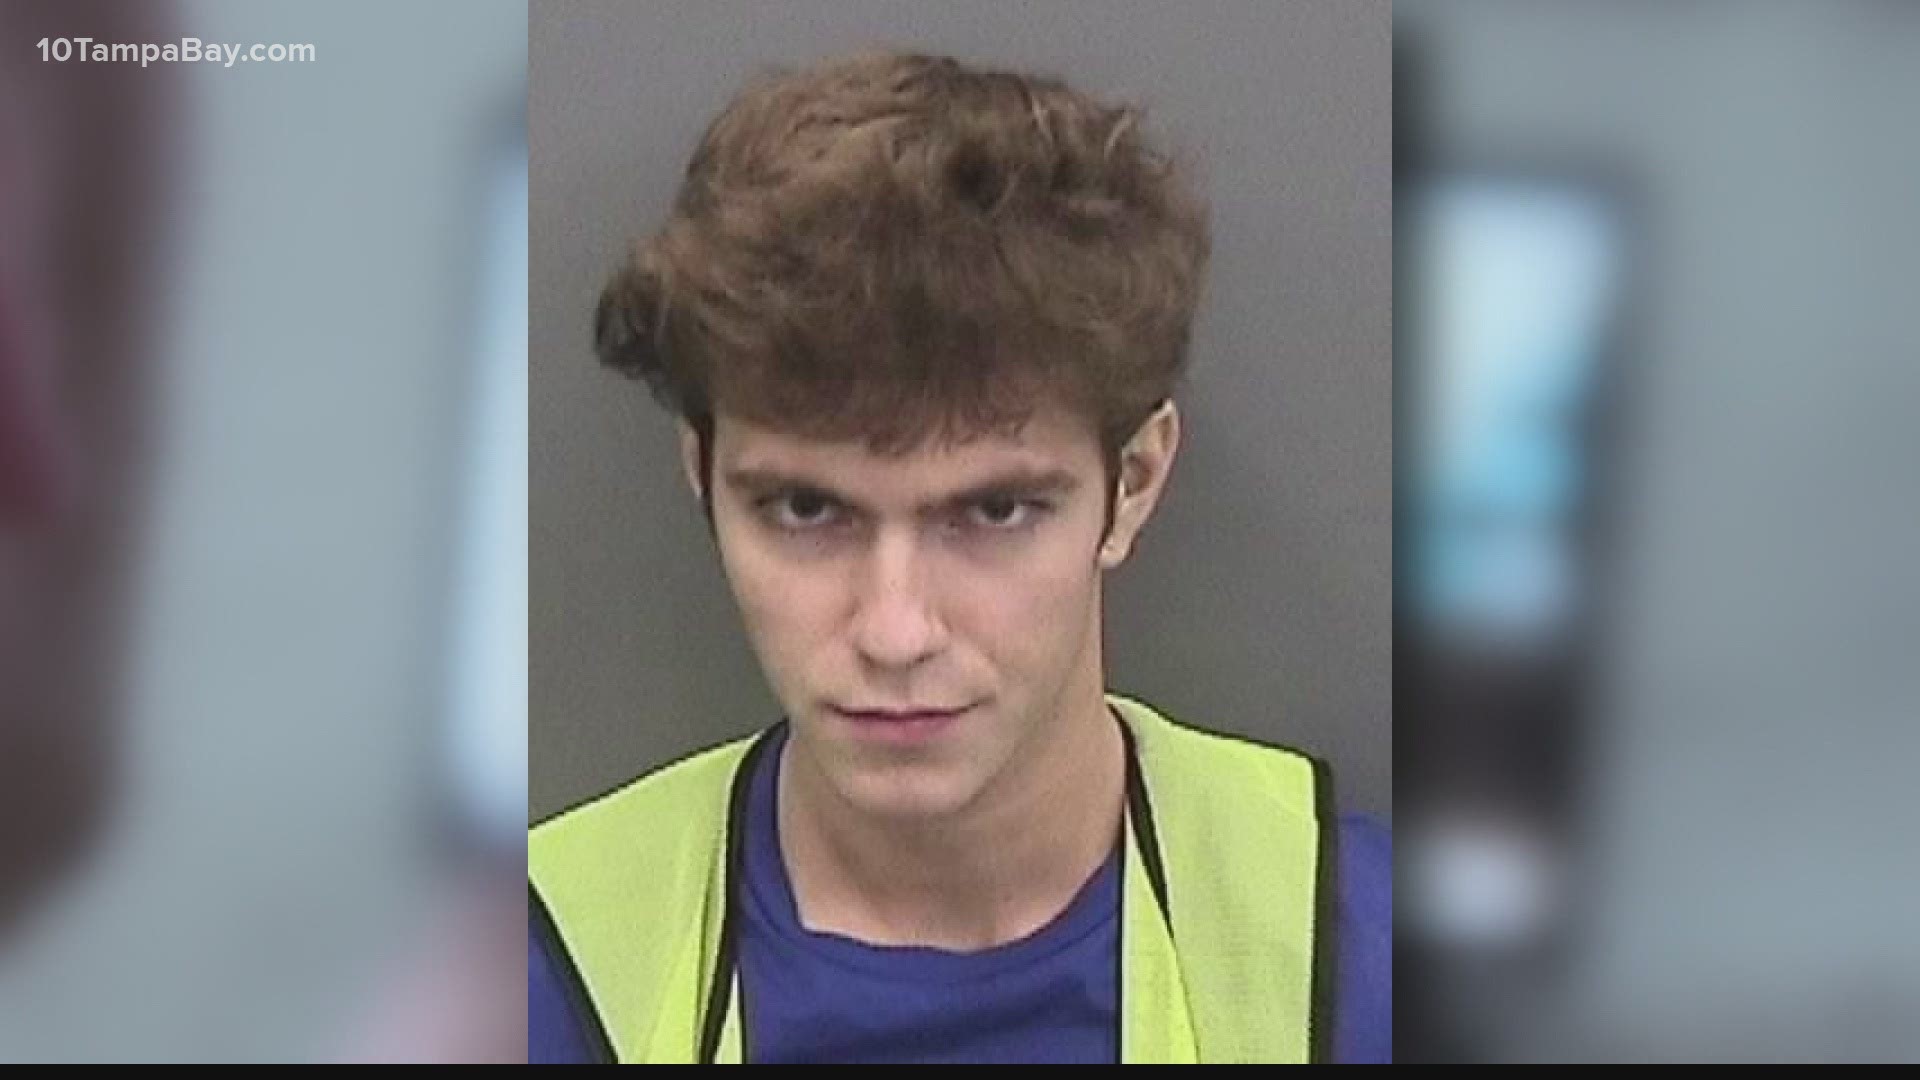 A 17-year-old Tampa teen is behind bars facing 30 felony charges for "scamming people across America," Hillsborough State Attorney Andrew Warren said Friday.